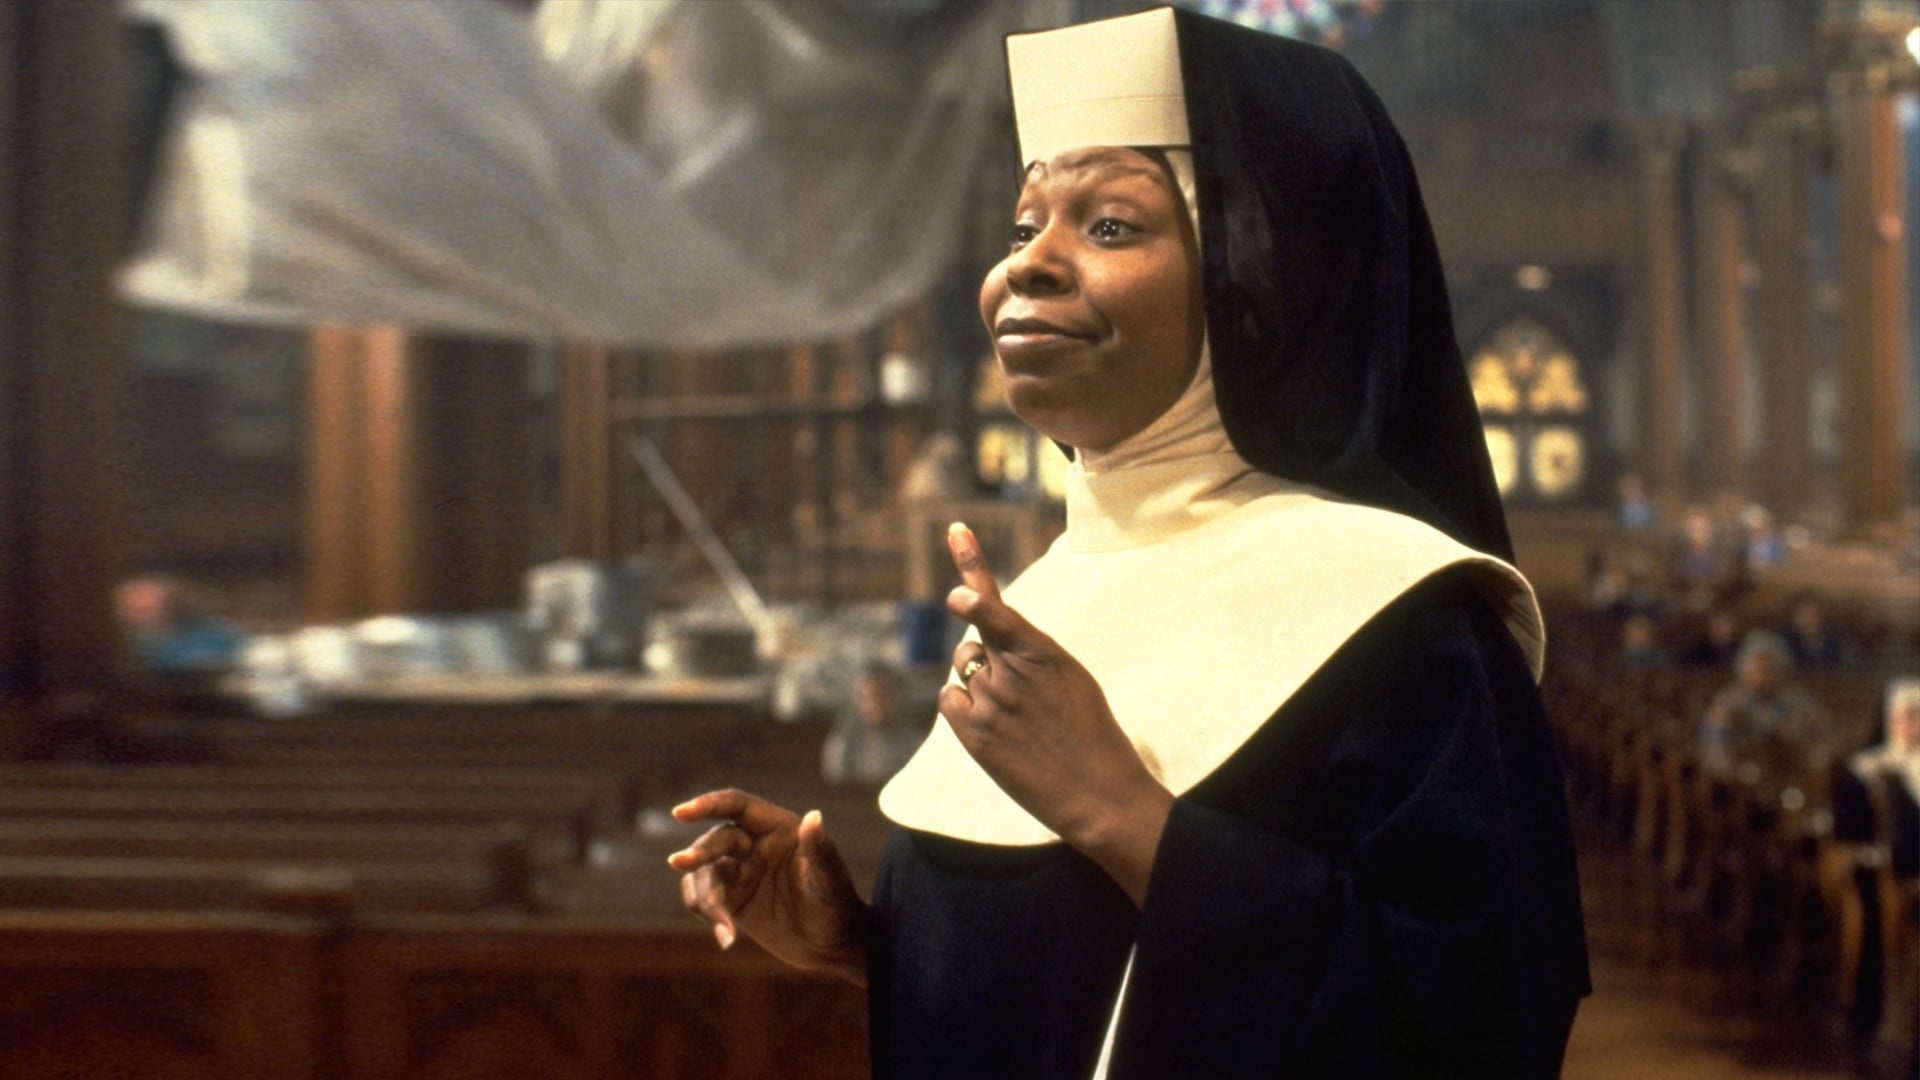 Sister Act movie, Tubi streaming, What's coming, March 2022, 1920x1080 Full HD Desktop